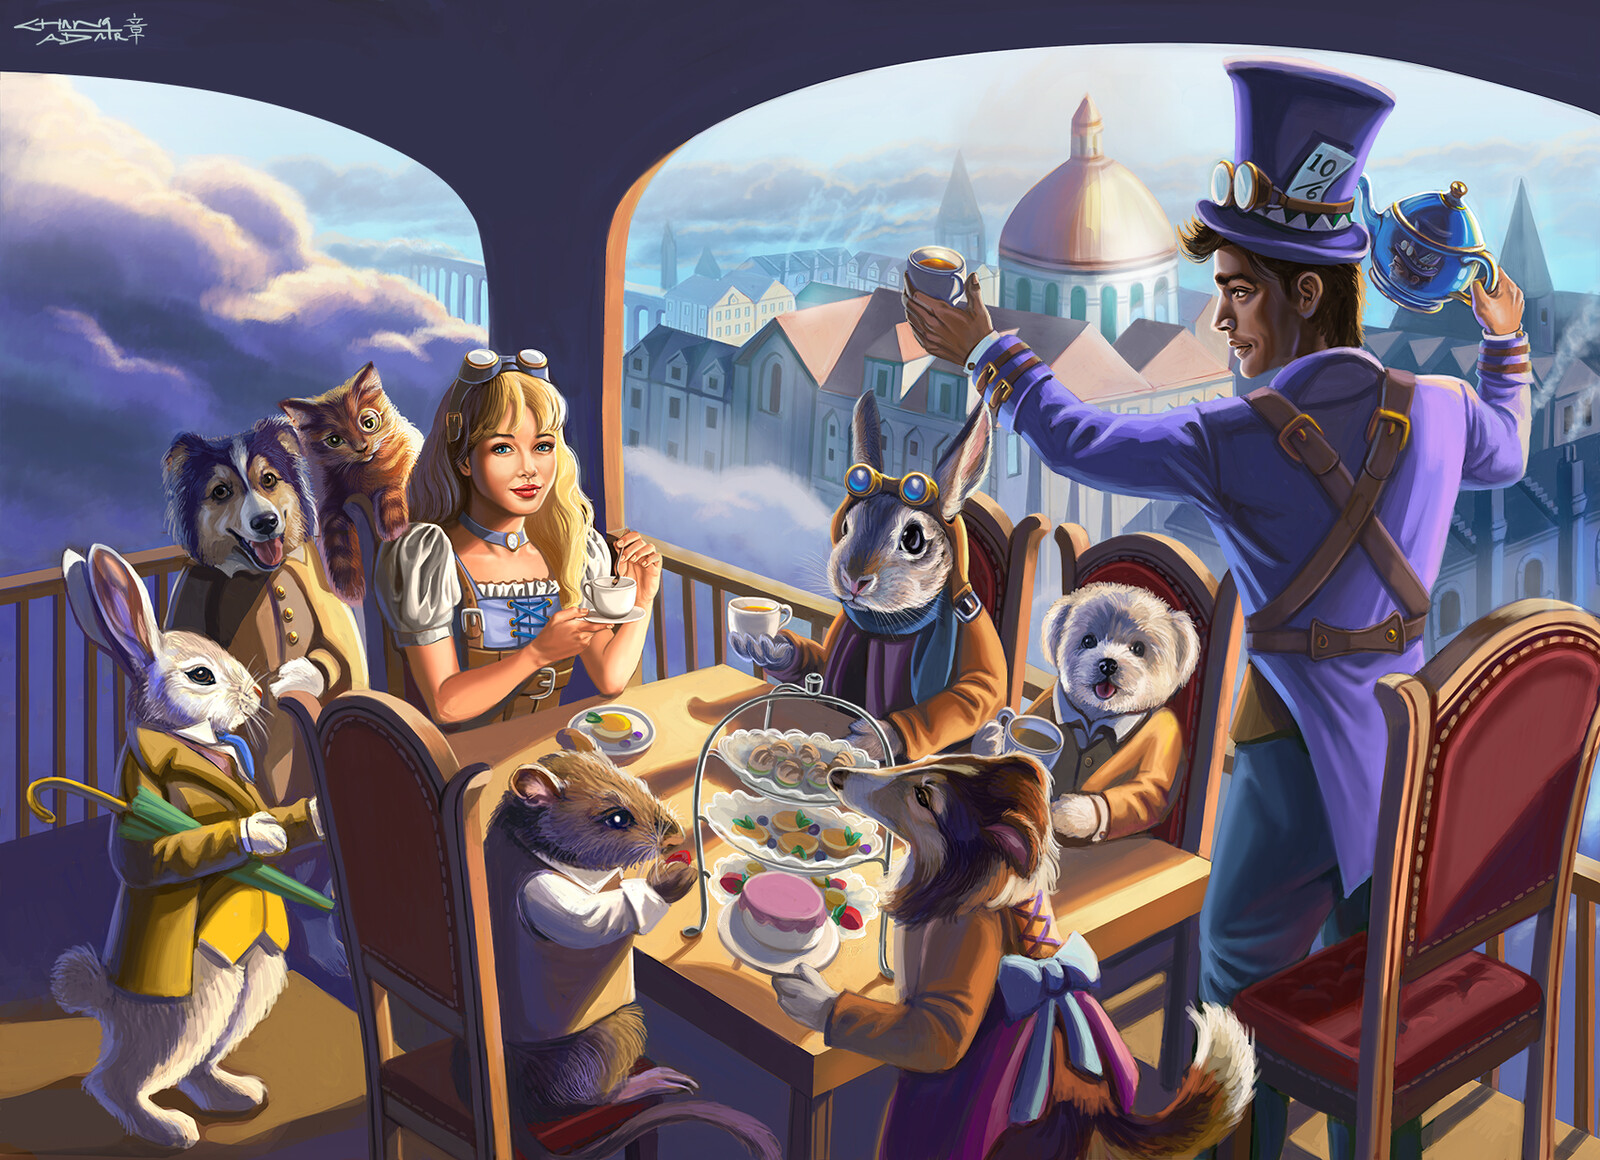 Steampunk Alice is enjoying tea at the Mad Hatter's Tea Party on board his airship.